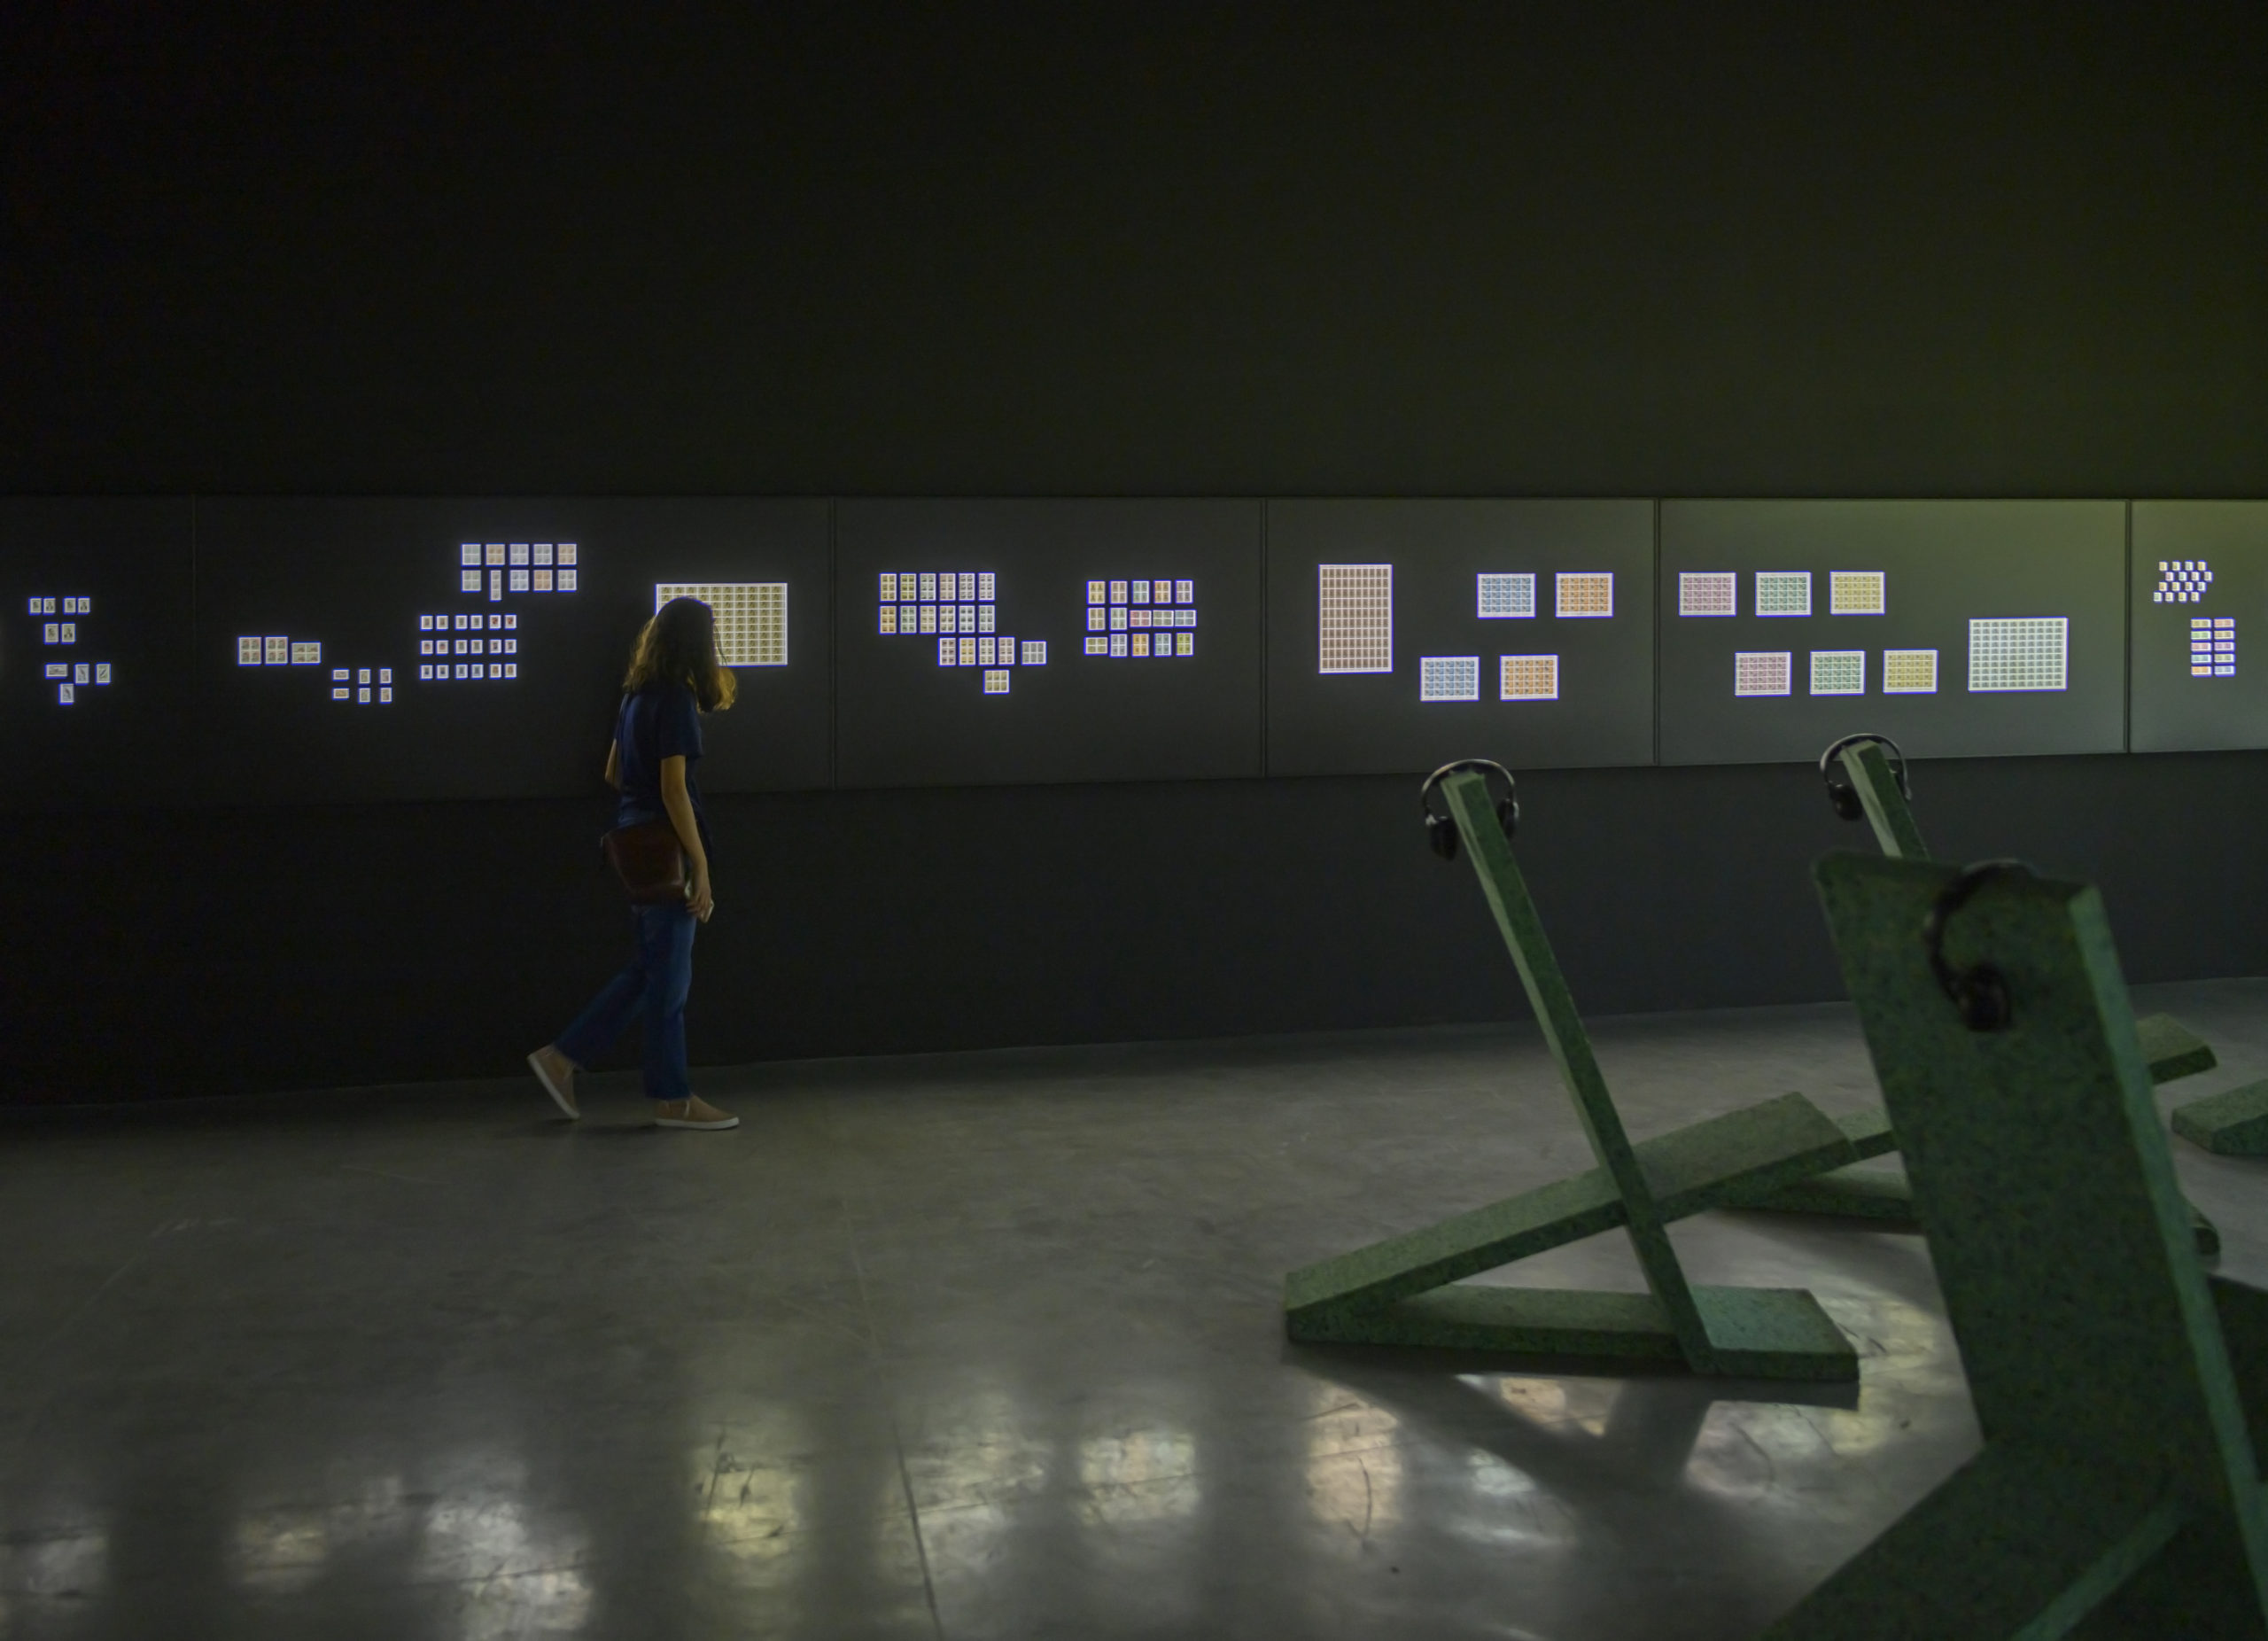 A person walks along a series of panels containing a number of illuminated stamps with a series of chairs and headphones reside in the foreground.